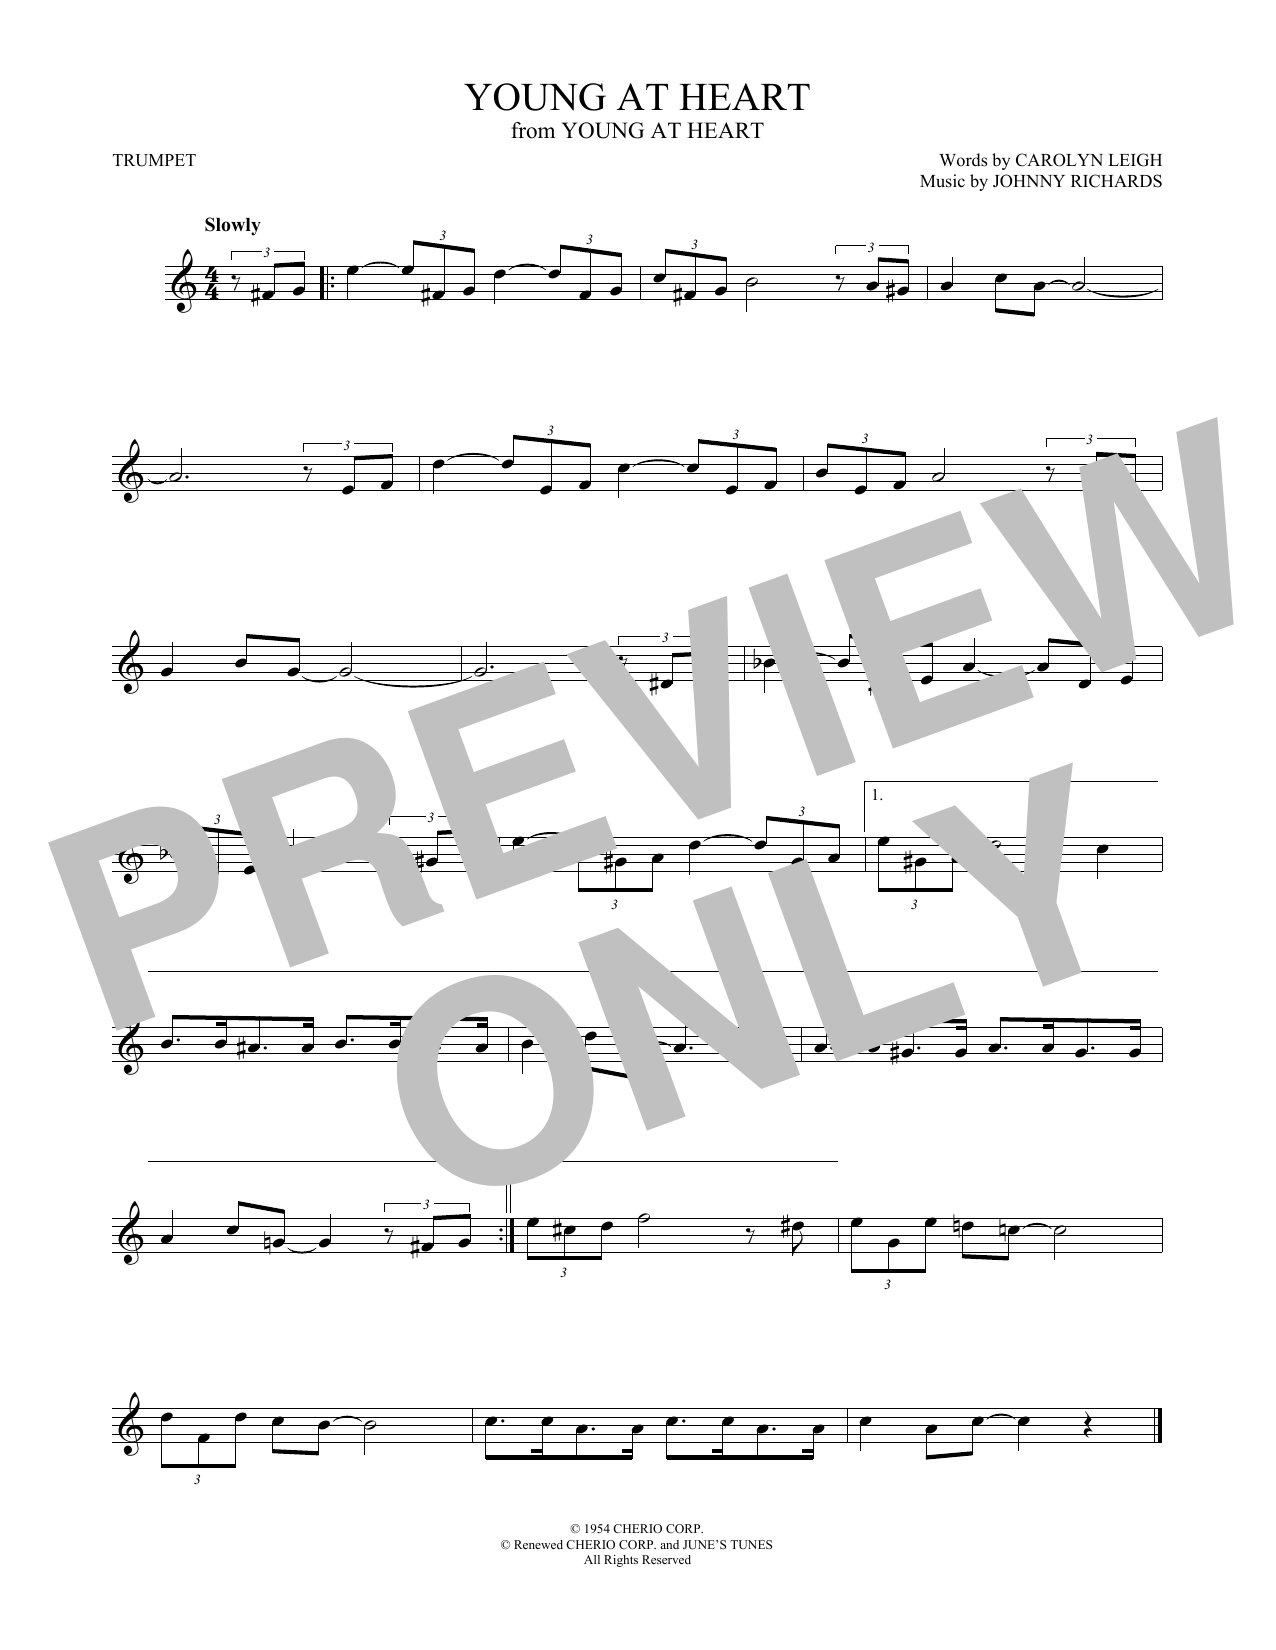 Carolyn Leigh Young At Heart sheet music notes and chords. Download Printable PDF.